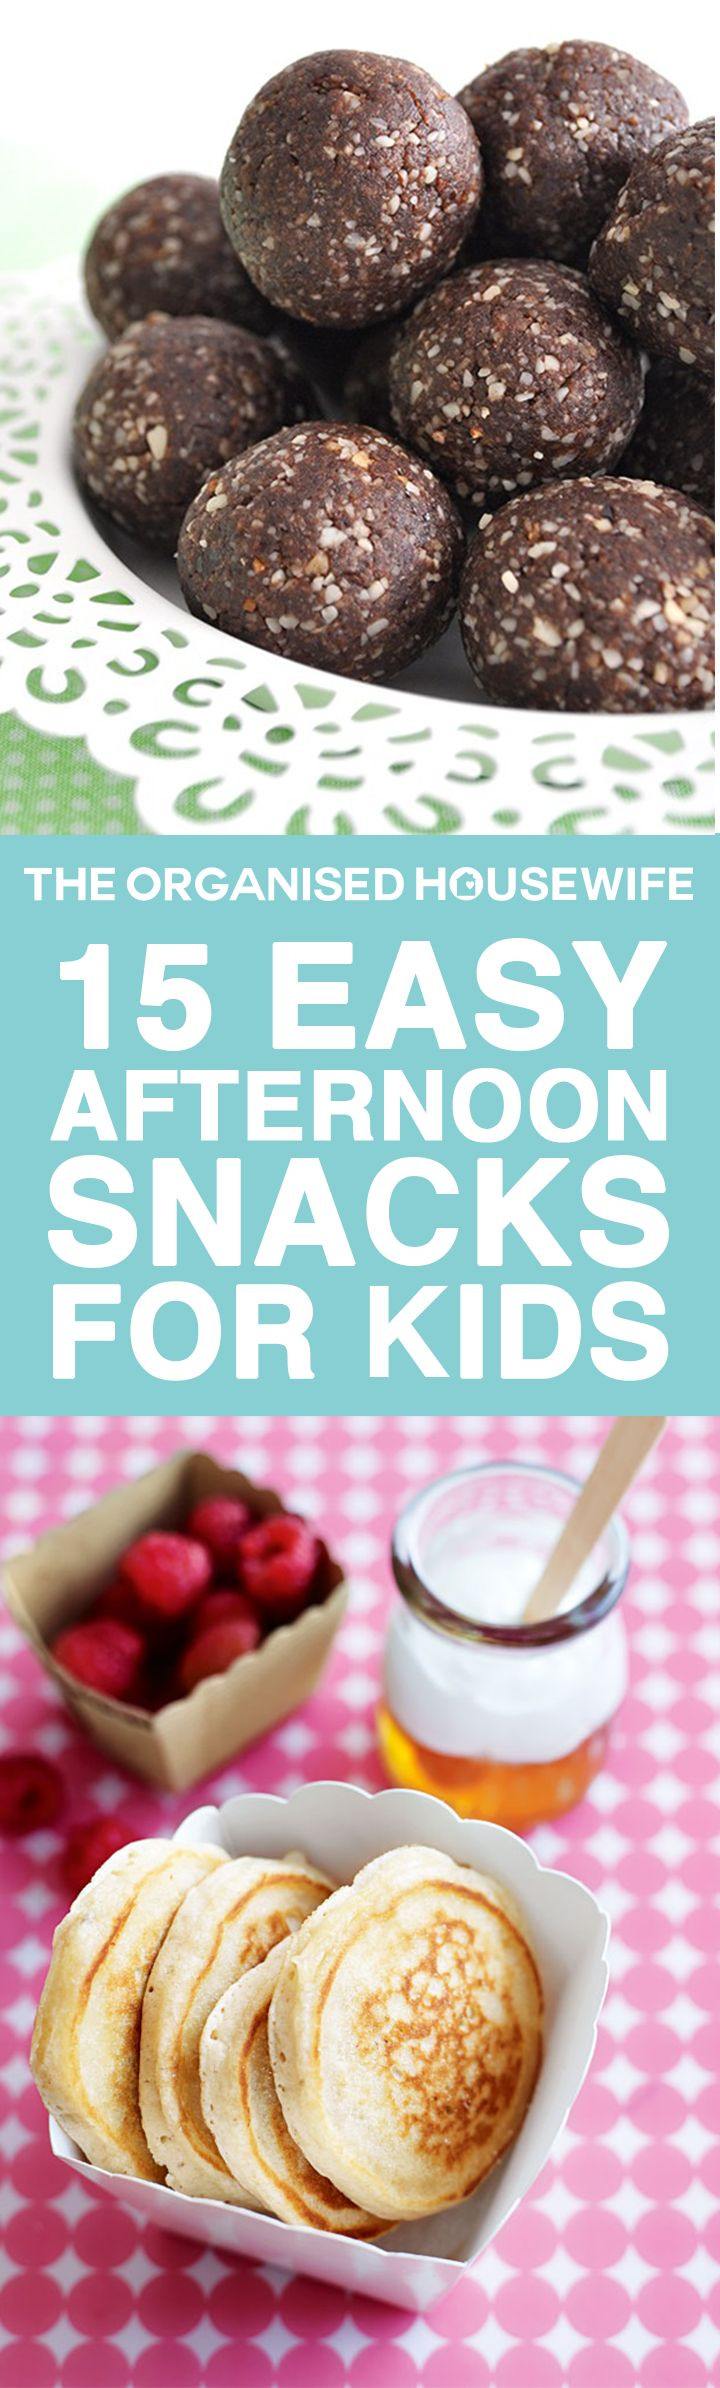 Healthy Snacks With Tea
 15 Easy Afternoon Snacks For Kids Food